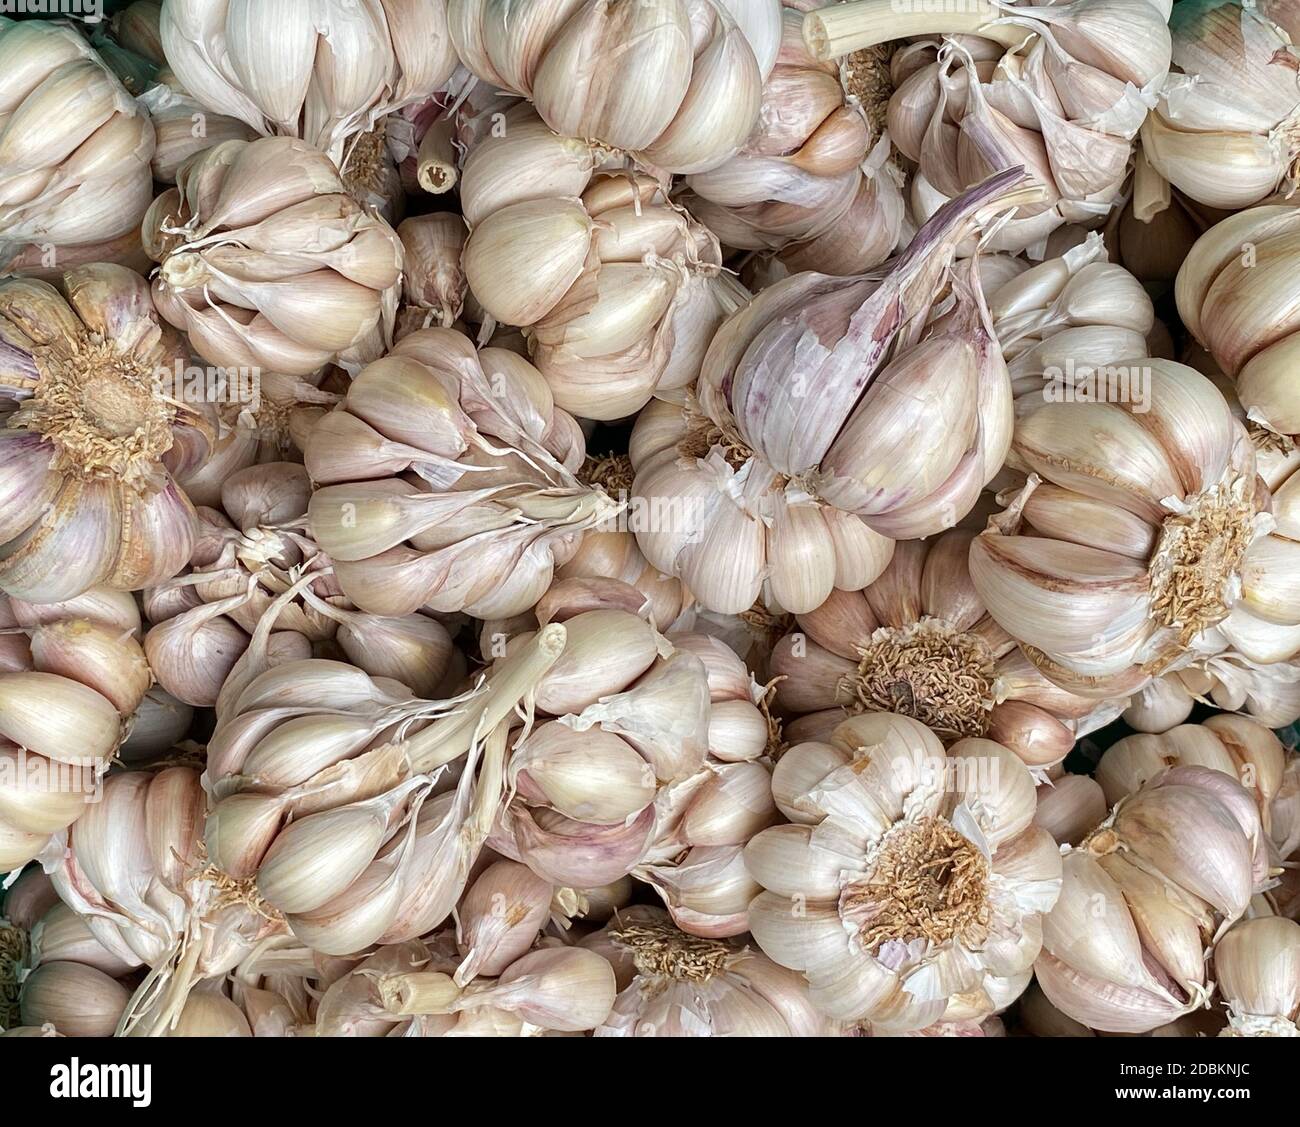 Garlic for sale in Funchal Market, Madeira Stock Photo